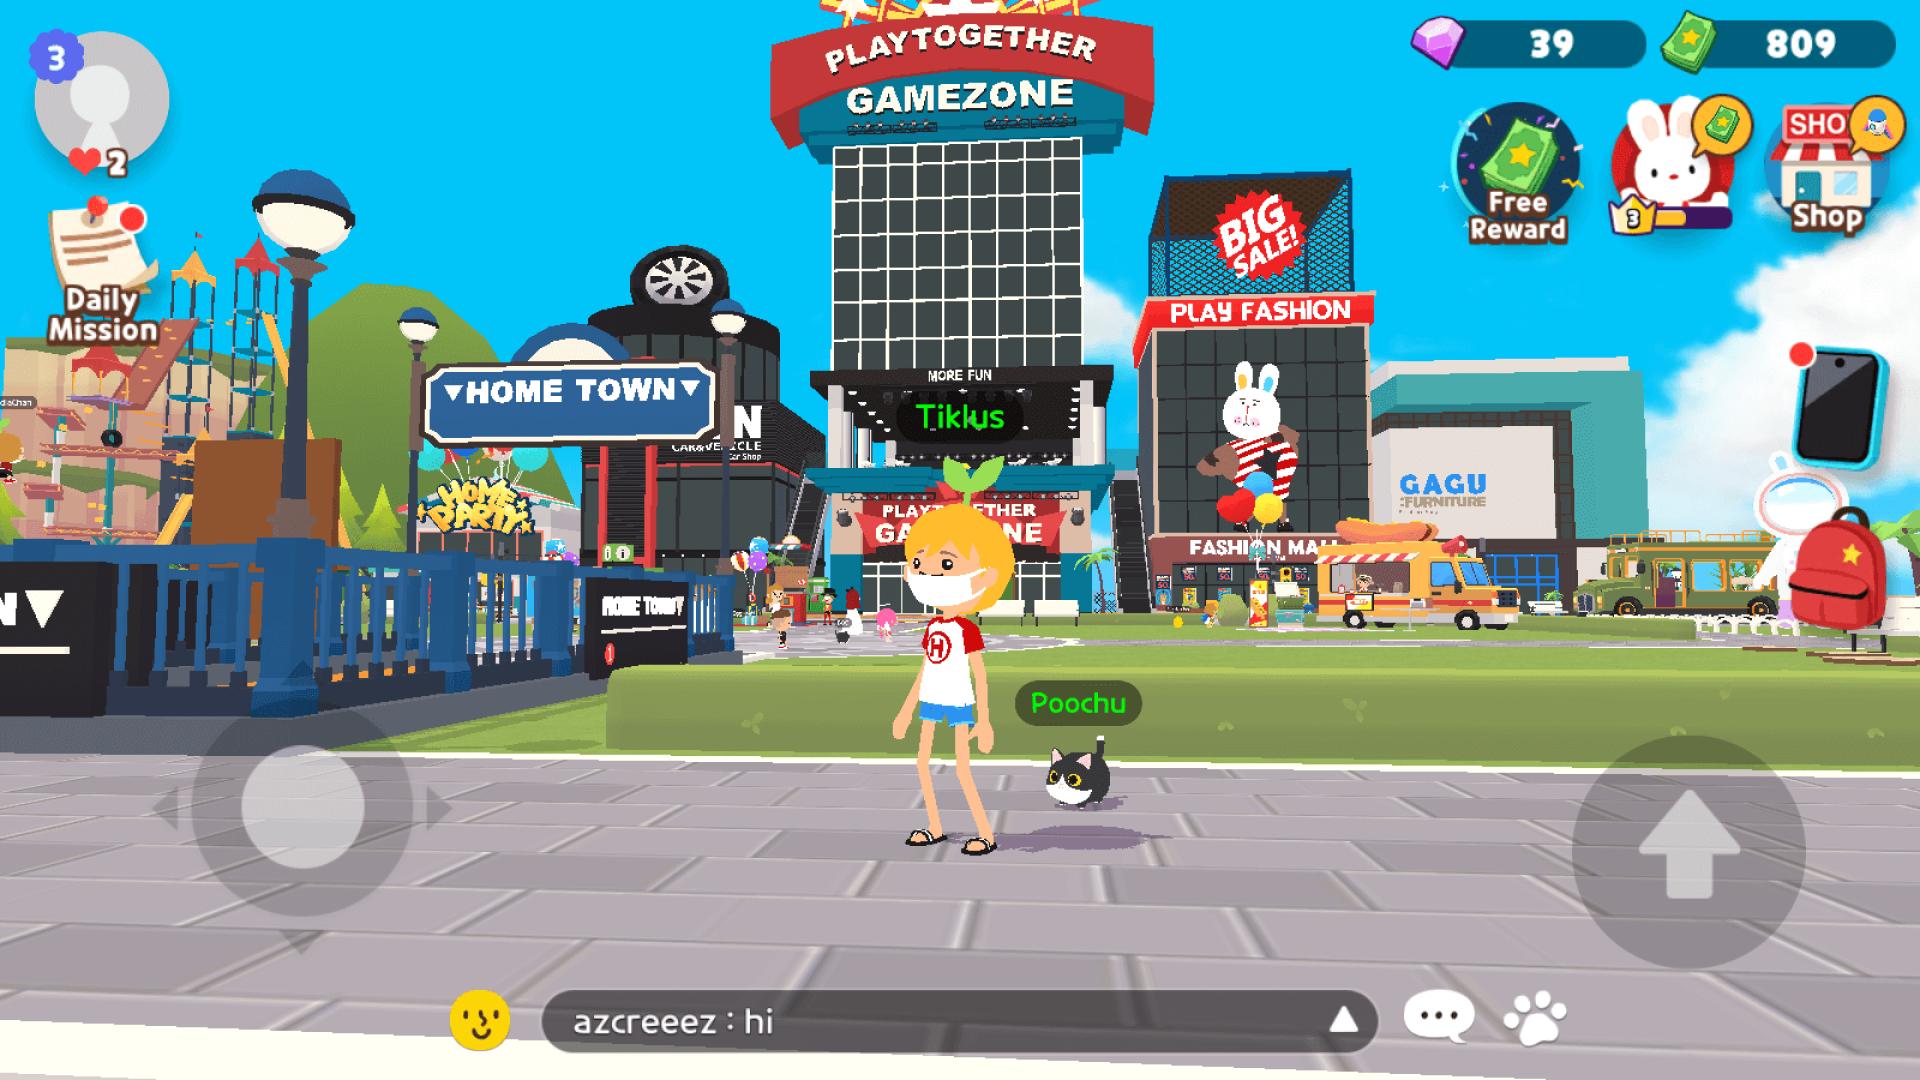 Games play shop. Play together игра. Togewer игры. Play together картинки. Play together на ПК.